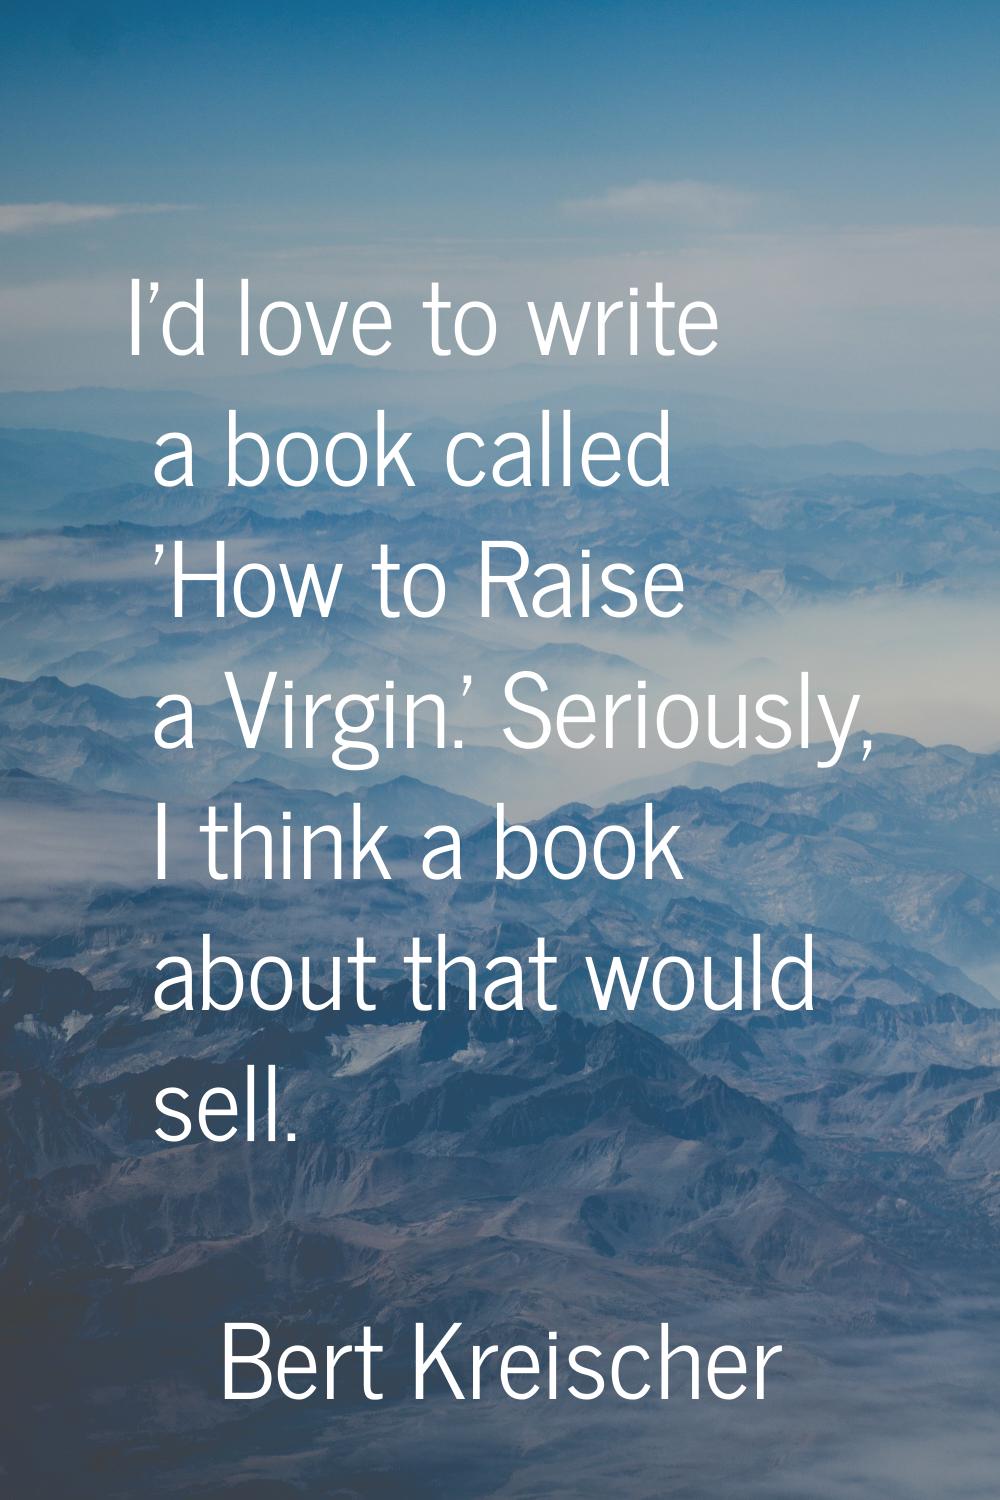 I'd love to write a book called 'How to Raise a Virgin.' Seriously, I think a book about that would